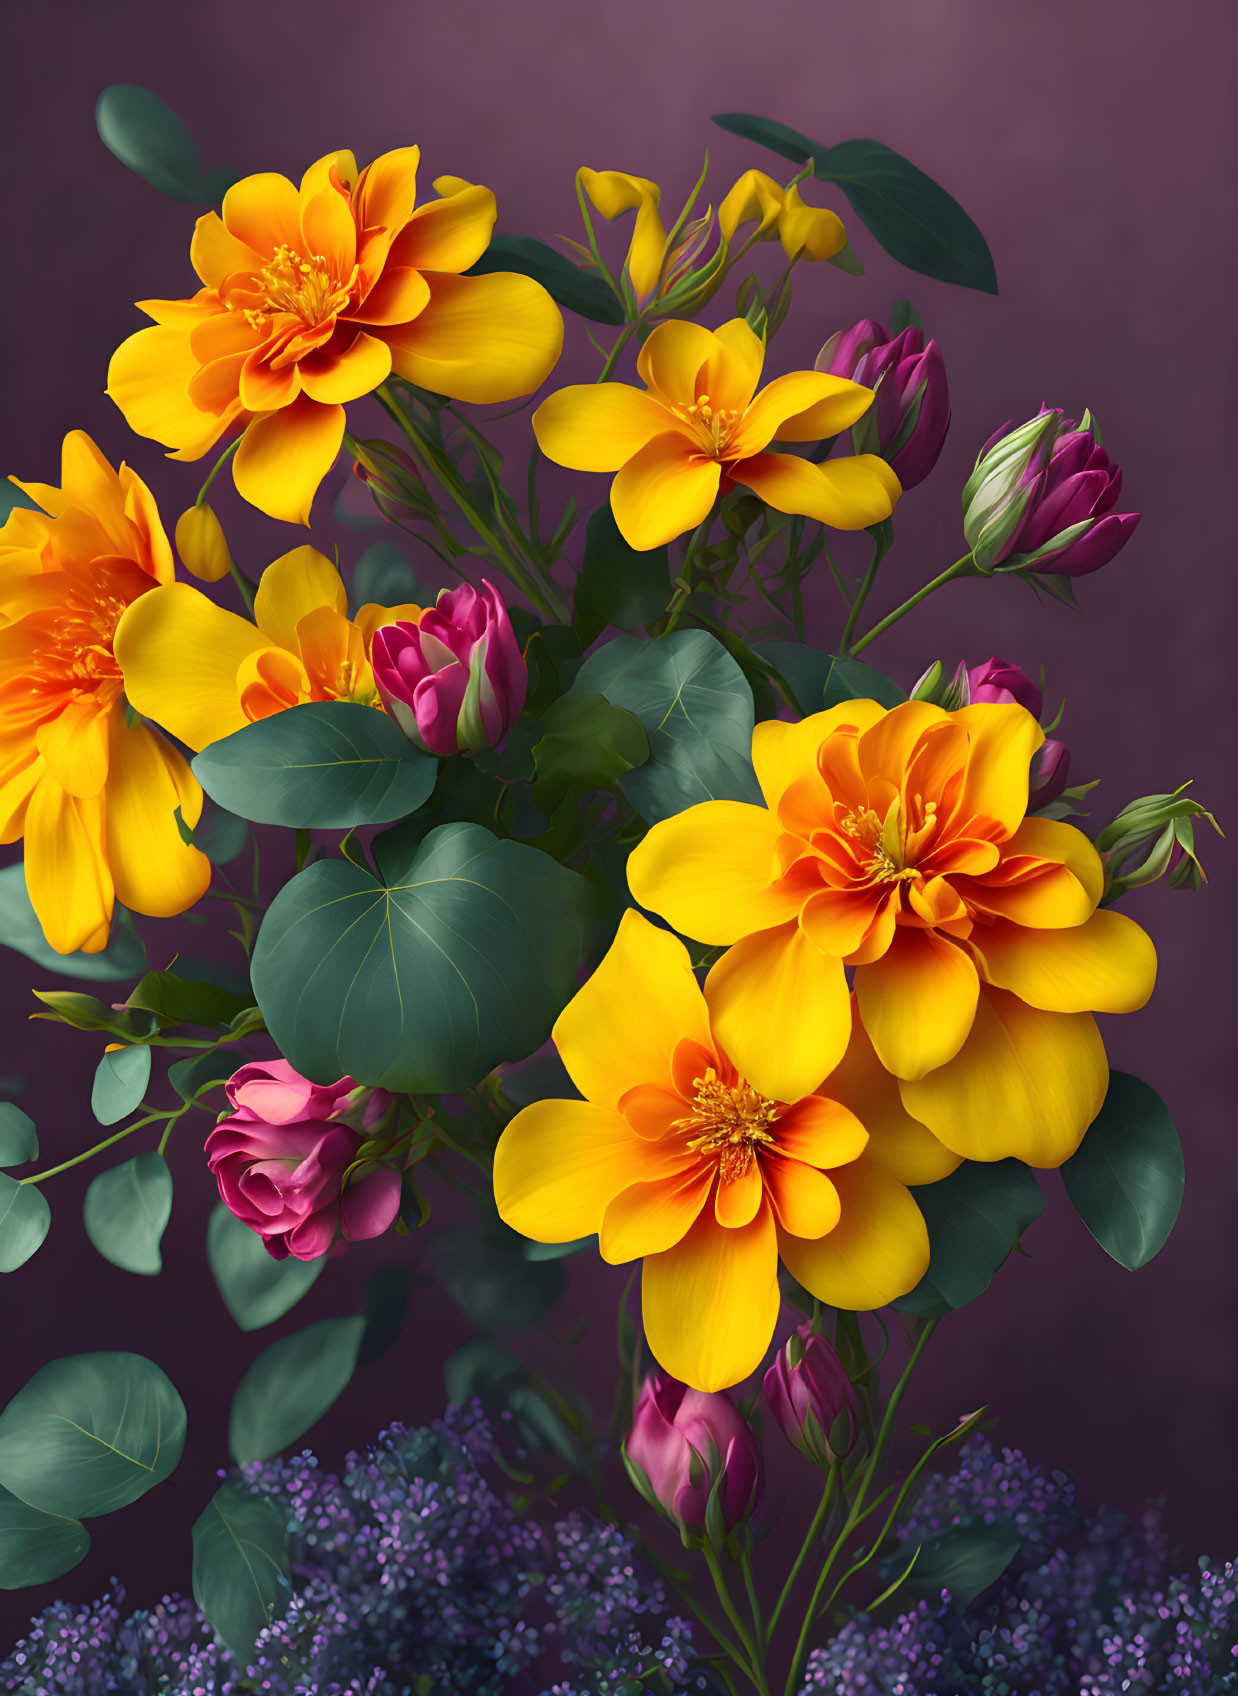 Colorful bouquet of yellow blooms, purple tulips, and green leaves on purple background